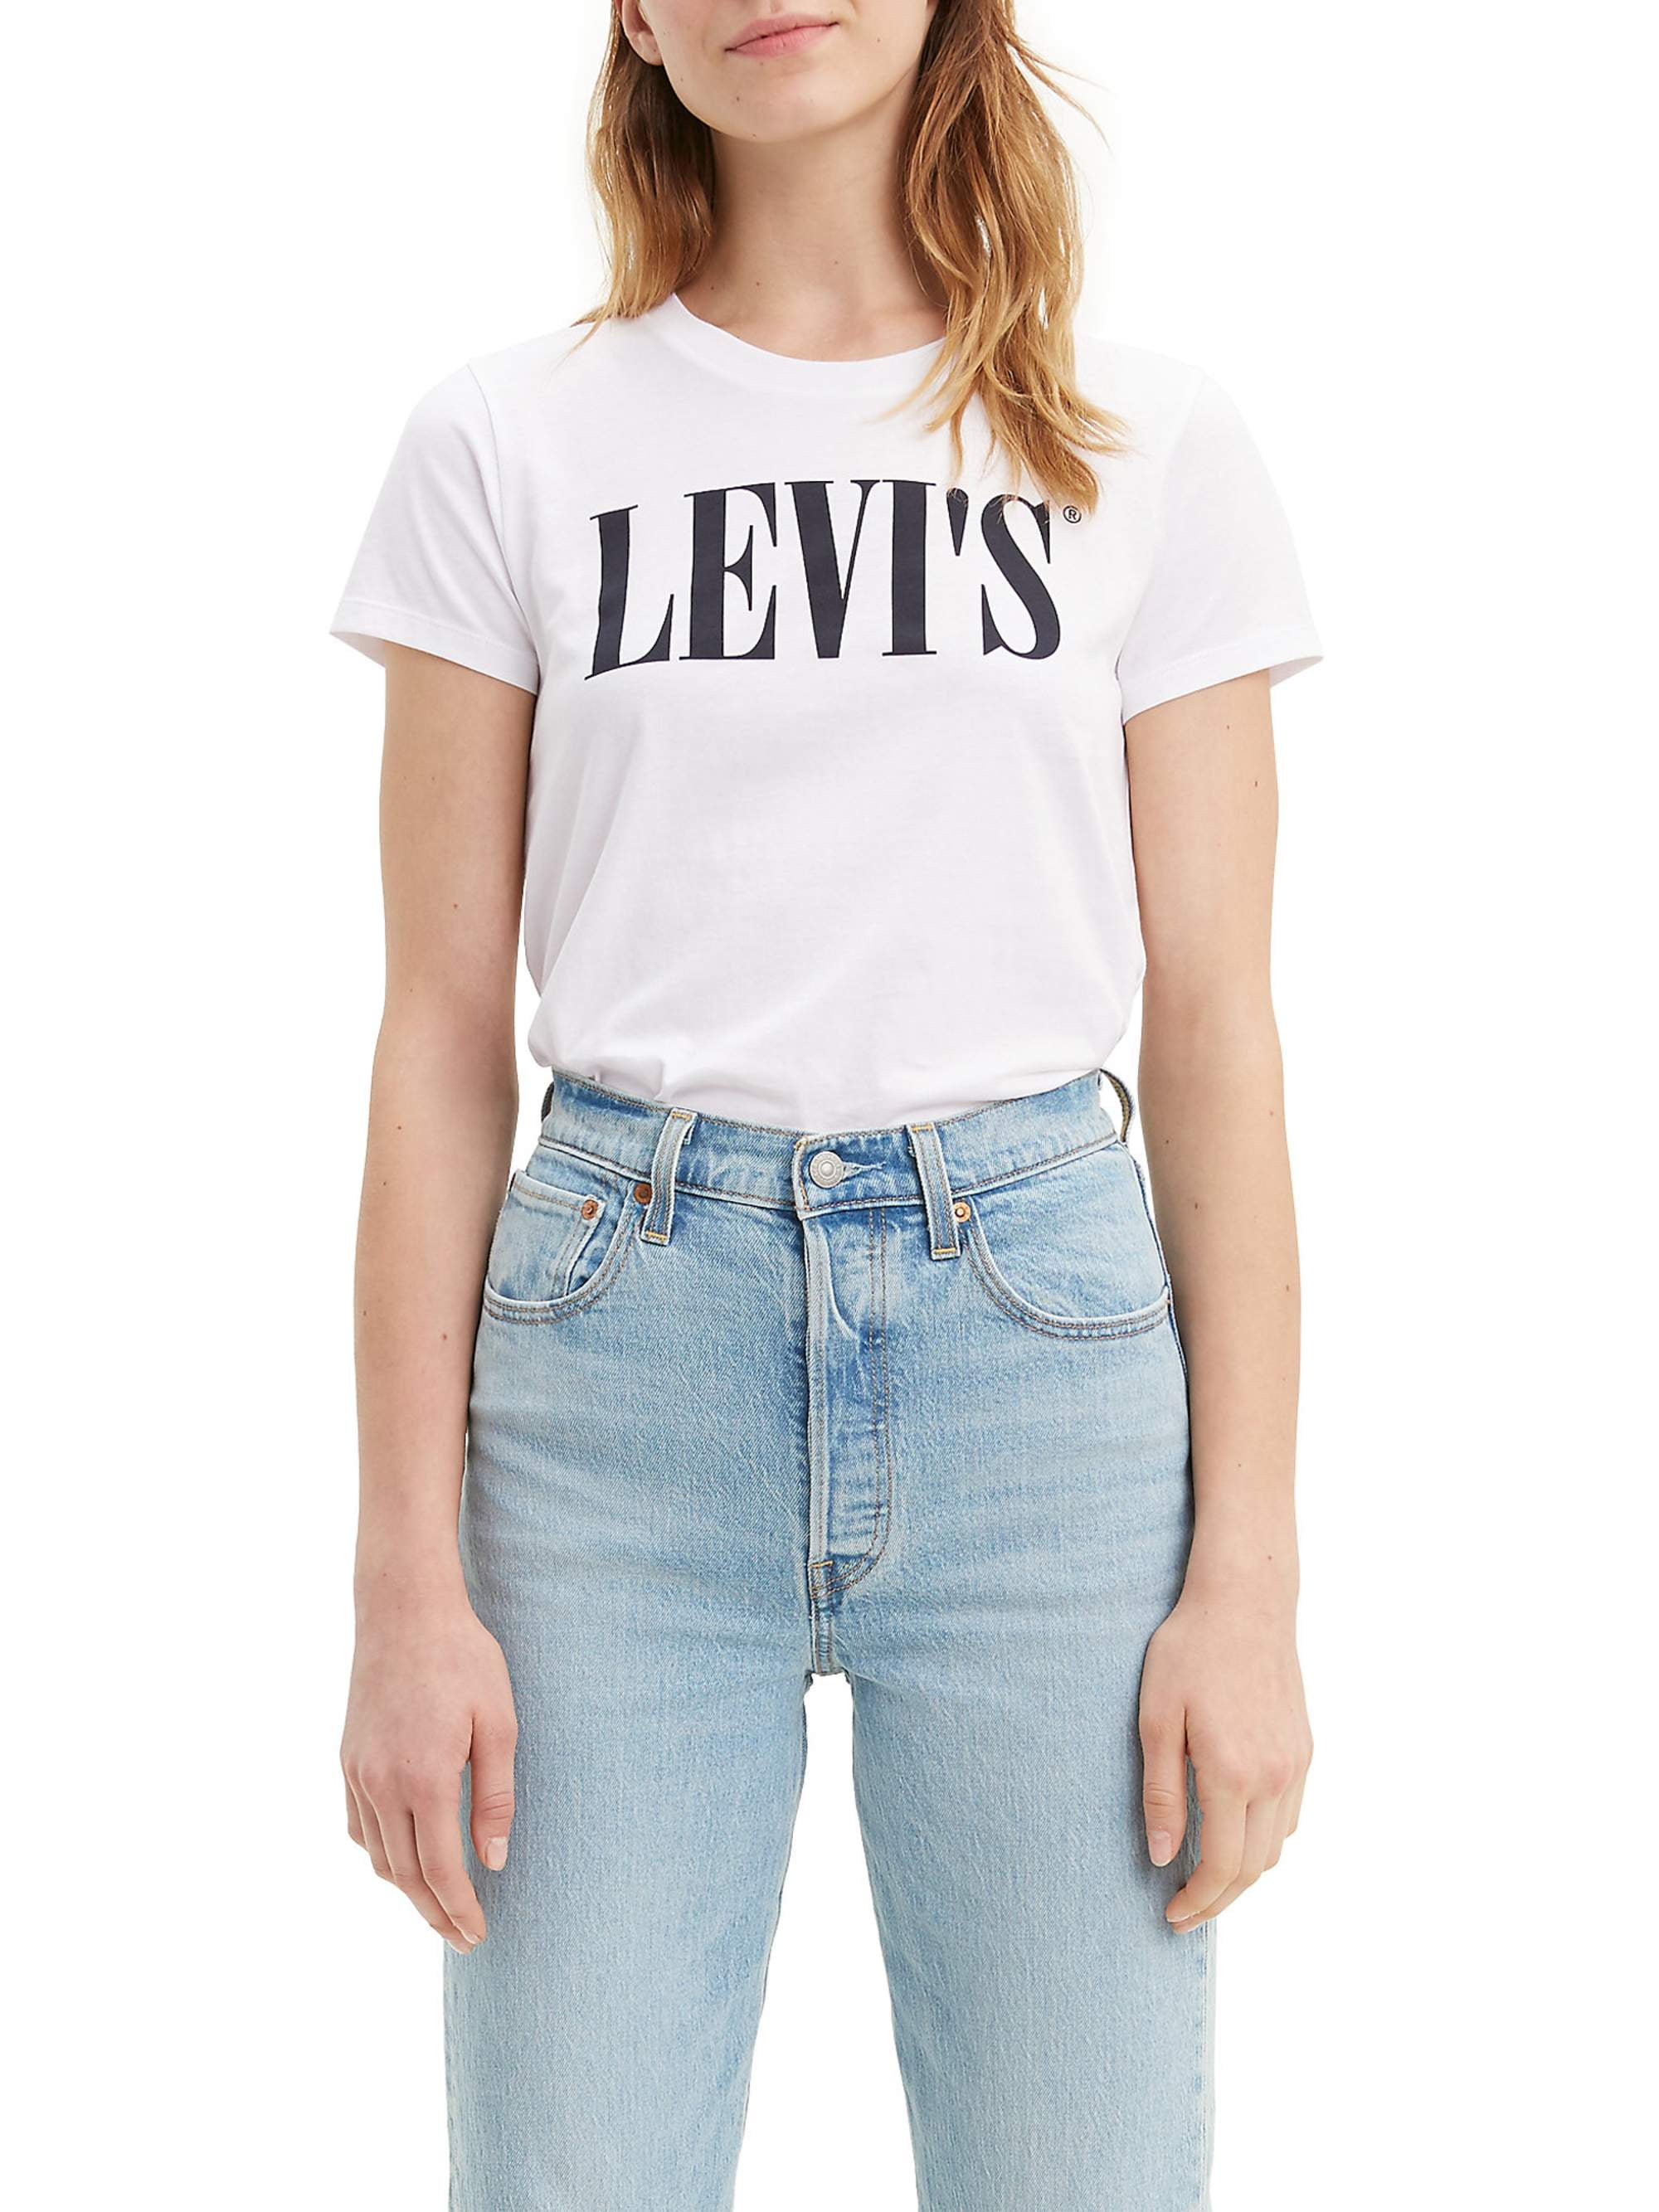 Details about   Levis Womens Jeans J.V Sporty Perfect T Shirt Housemark White Blue Worldwide 